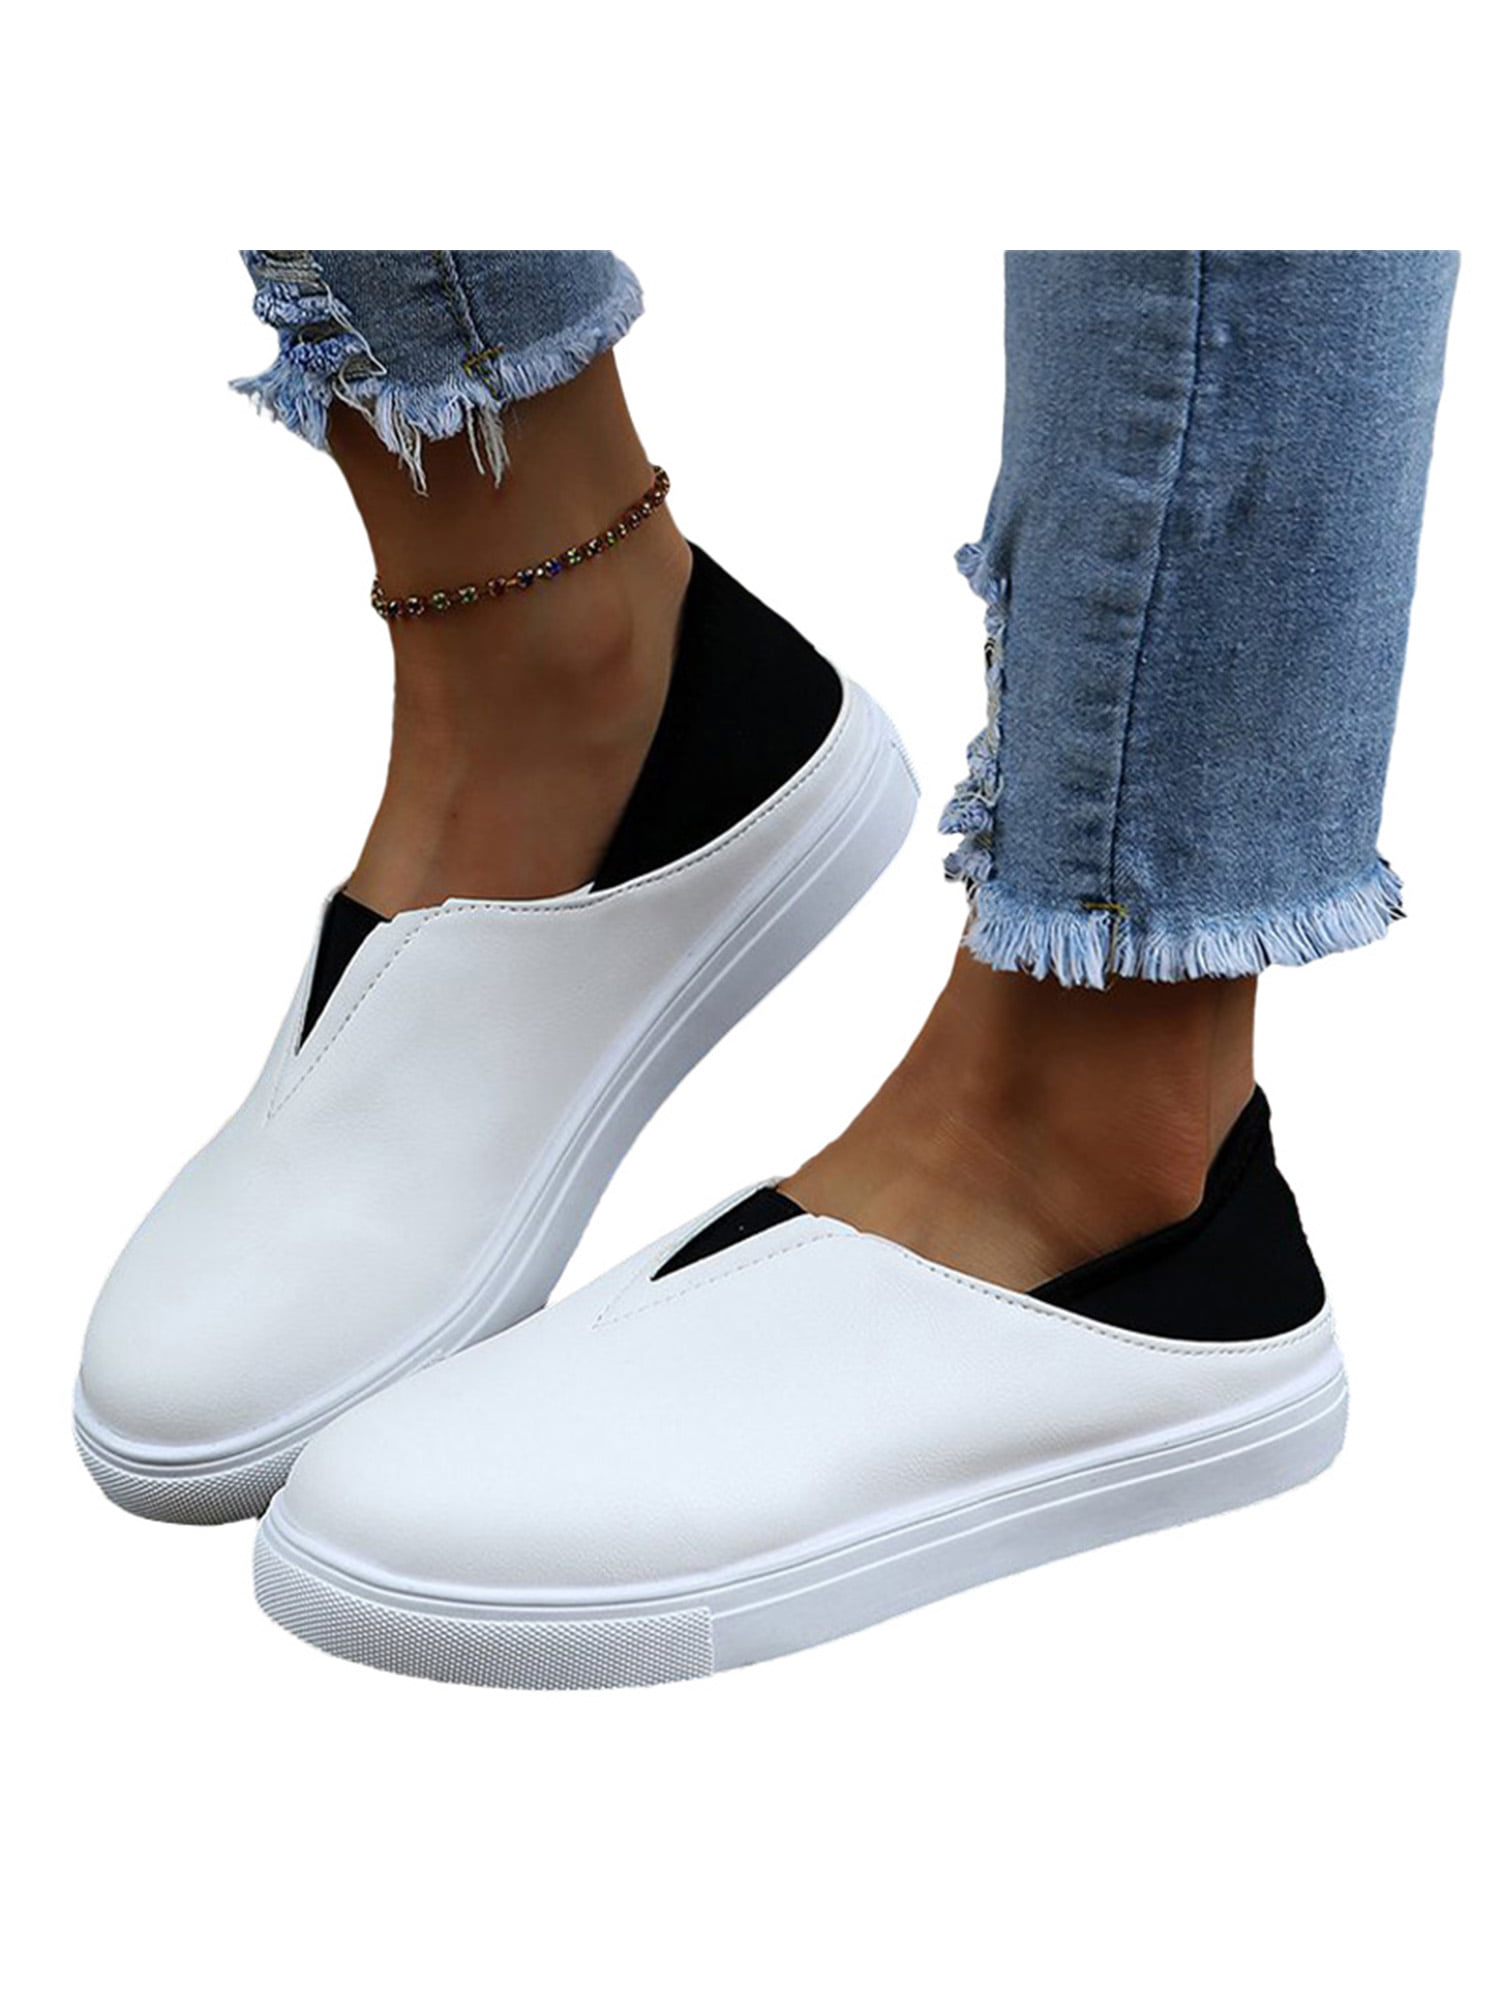 Women's Lightweight Slip-on Loafers Breathable Lace Ballet Flats Walking Shoes